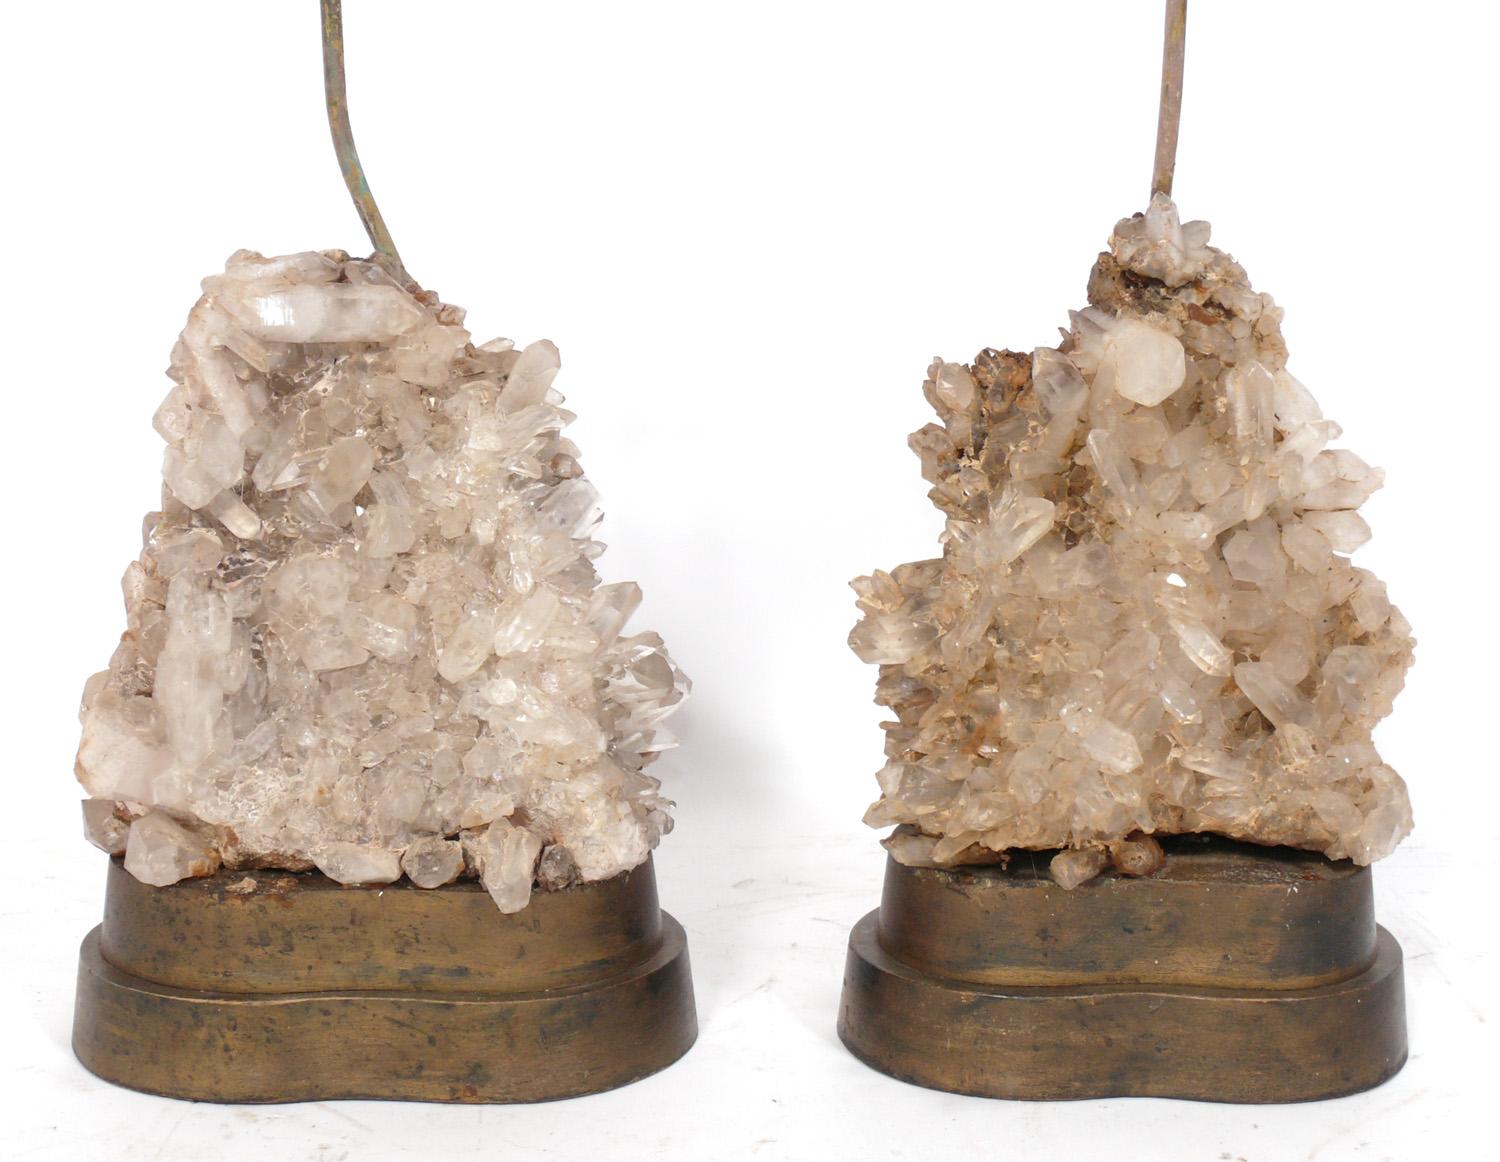 Pair of glamorous rock crystal lamps, designed by Carole Stupell, American, circa 1950s. They retain their original curvaceous silk shades. They have been rewired and are ready to use. They retain their warm original patina.